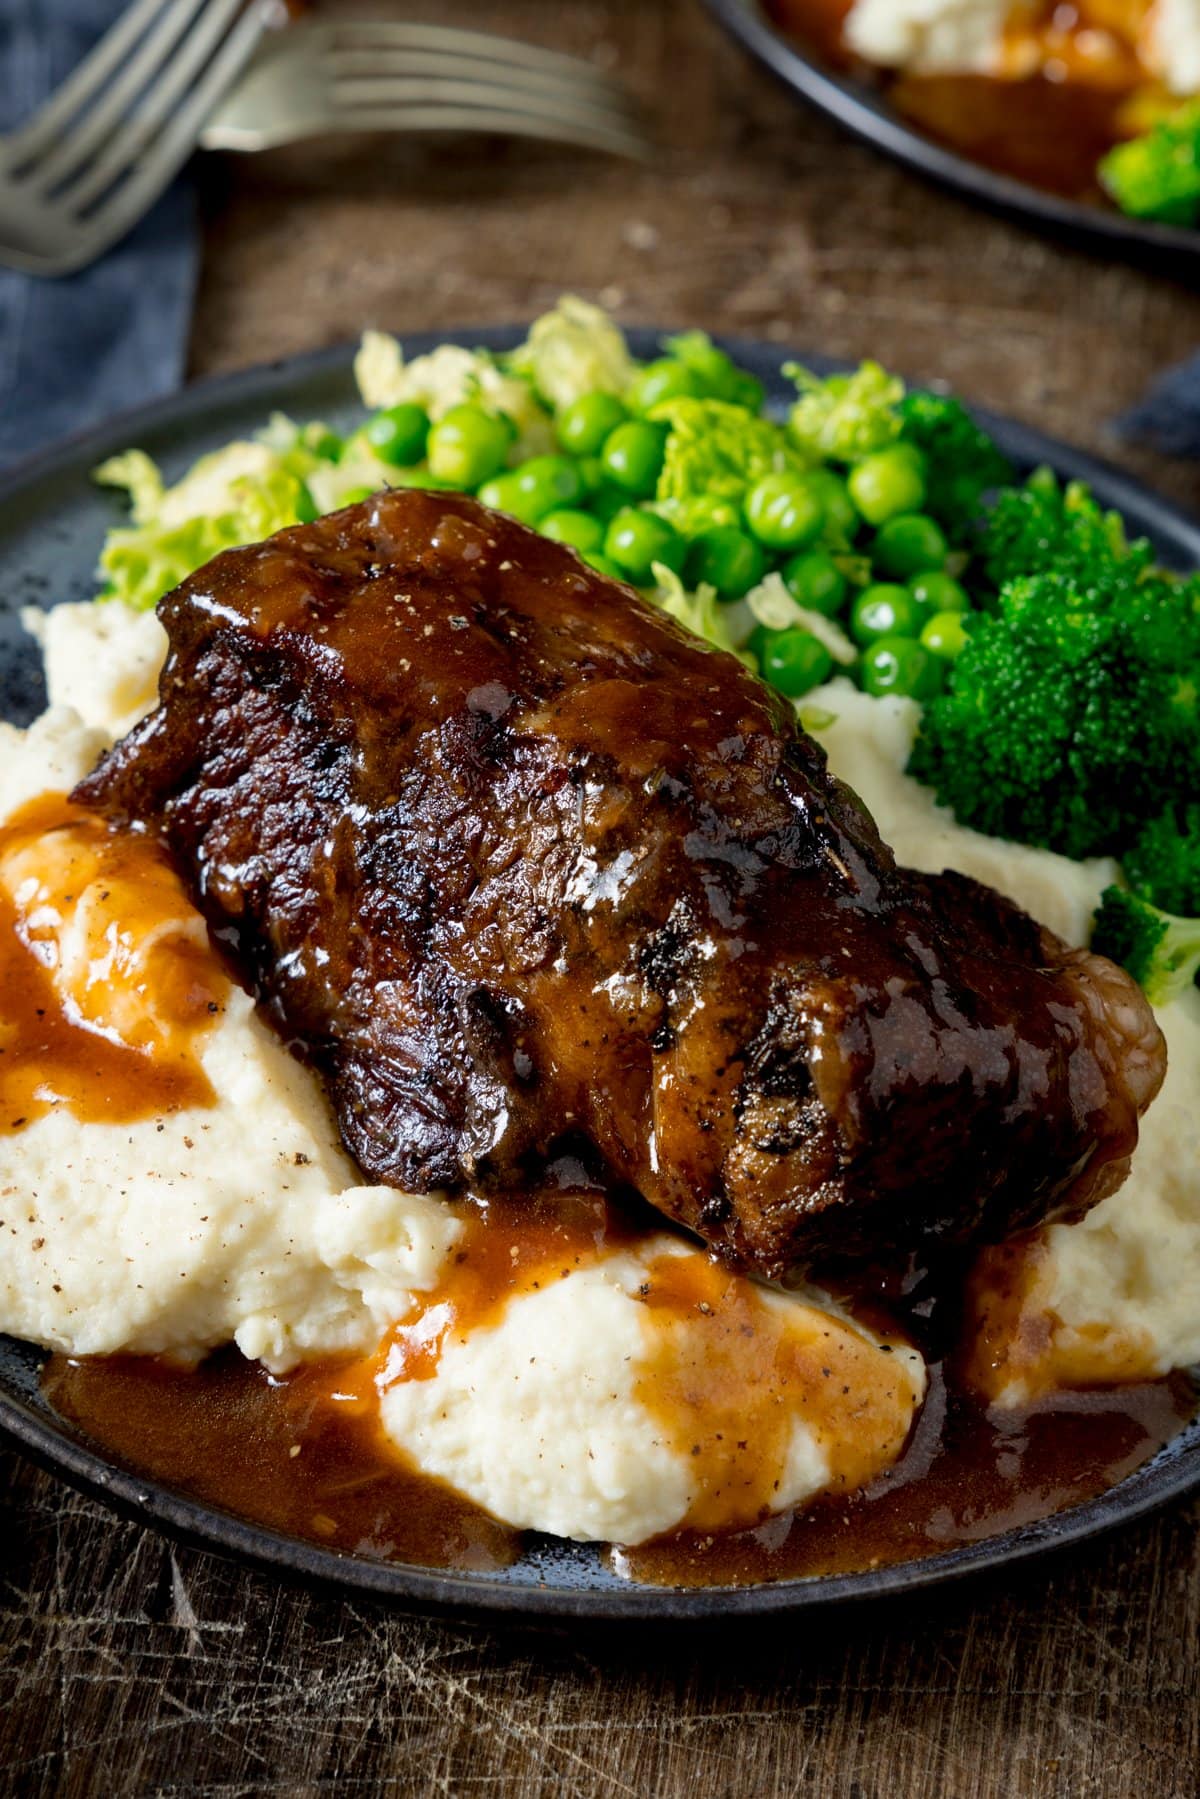 A close up of slow cooked beef short rib with gravy on a plate of mashed potatoes, with green vegetables also on the plate. The plate is on a wooden table.